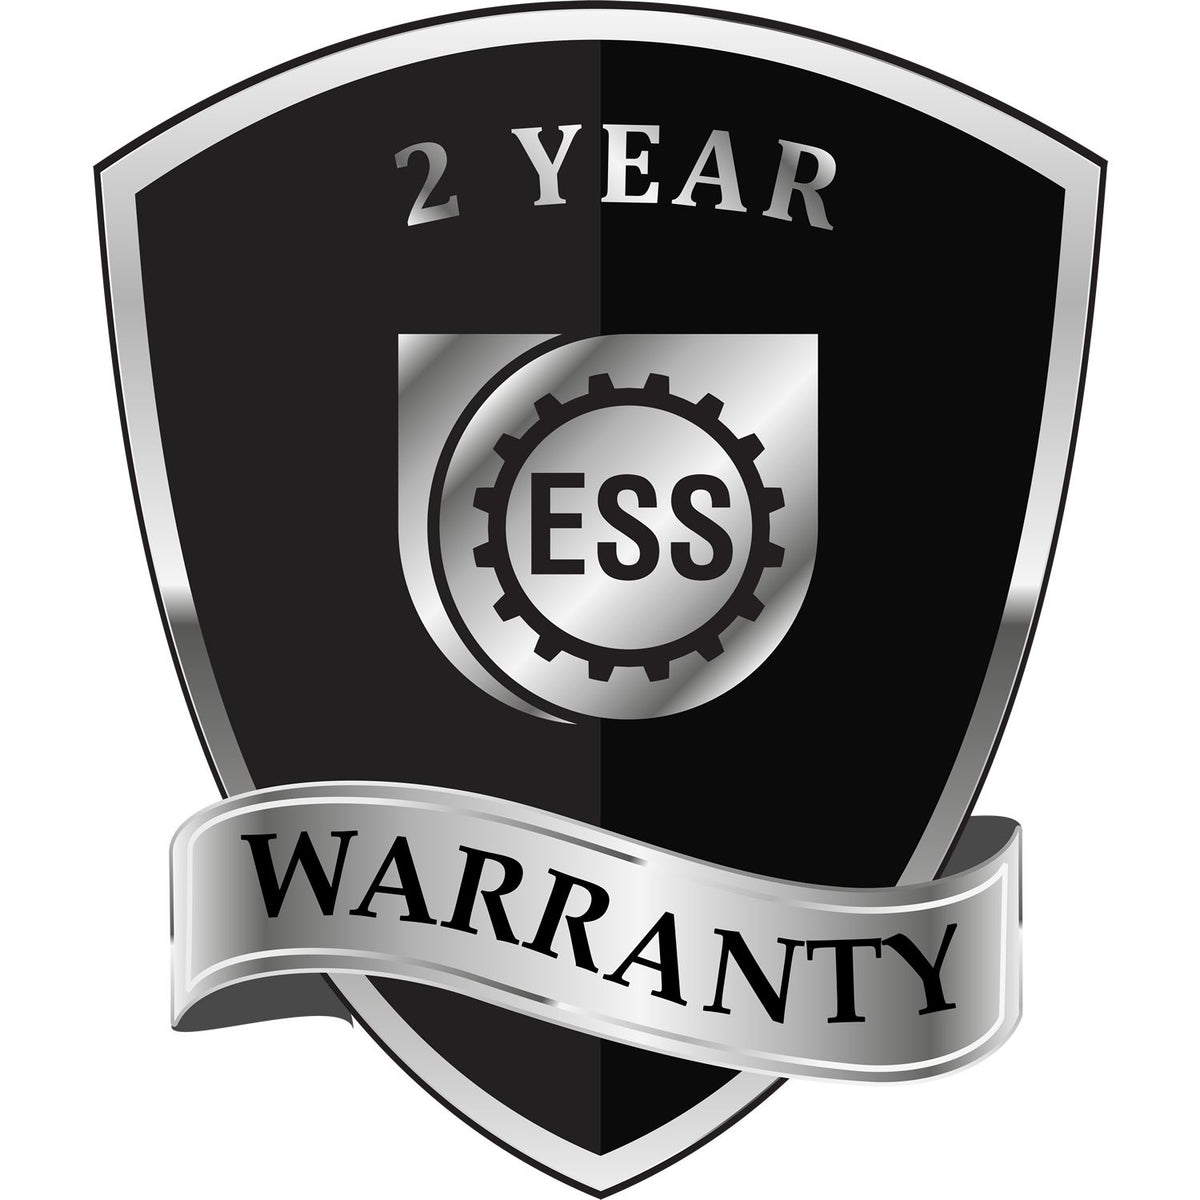 A badge or emblem showing a warranty icon for the Soft Pocket Iowa Landscape Architect Embosser